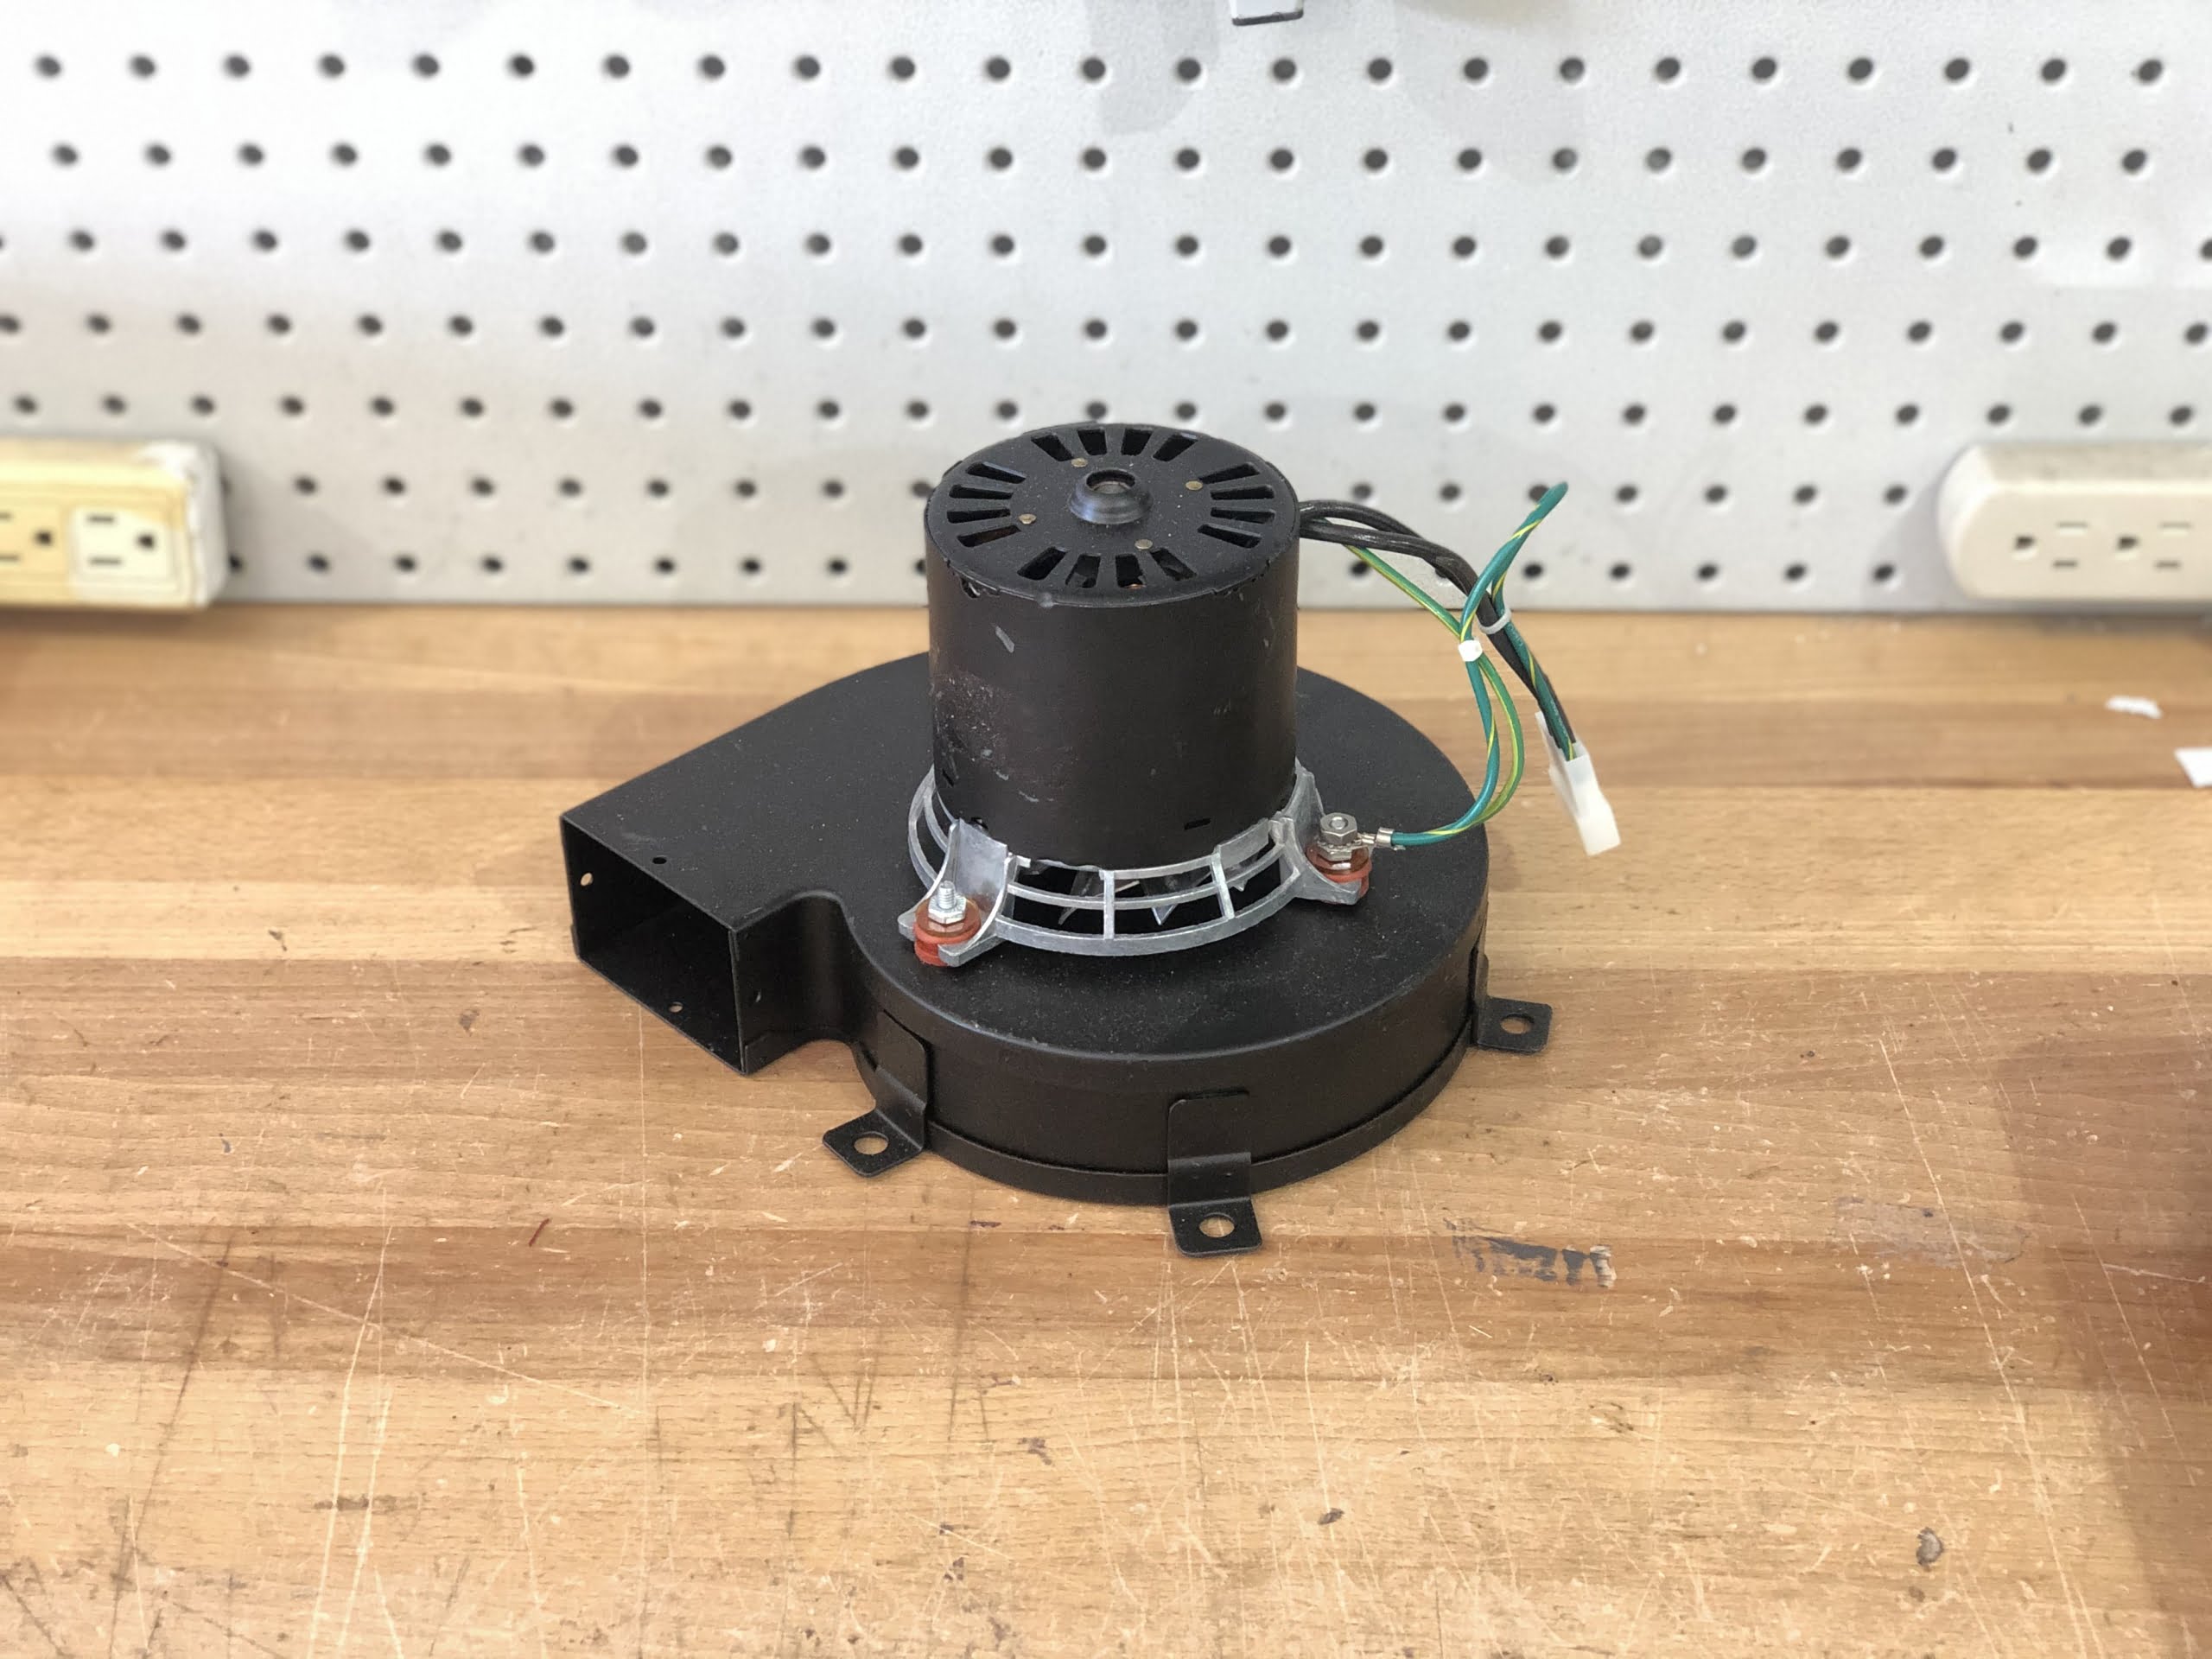 Blower Motor for the NCAT Ignition oven